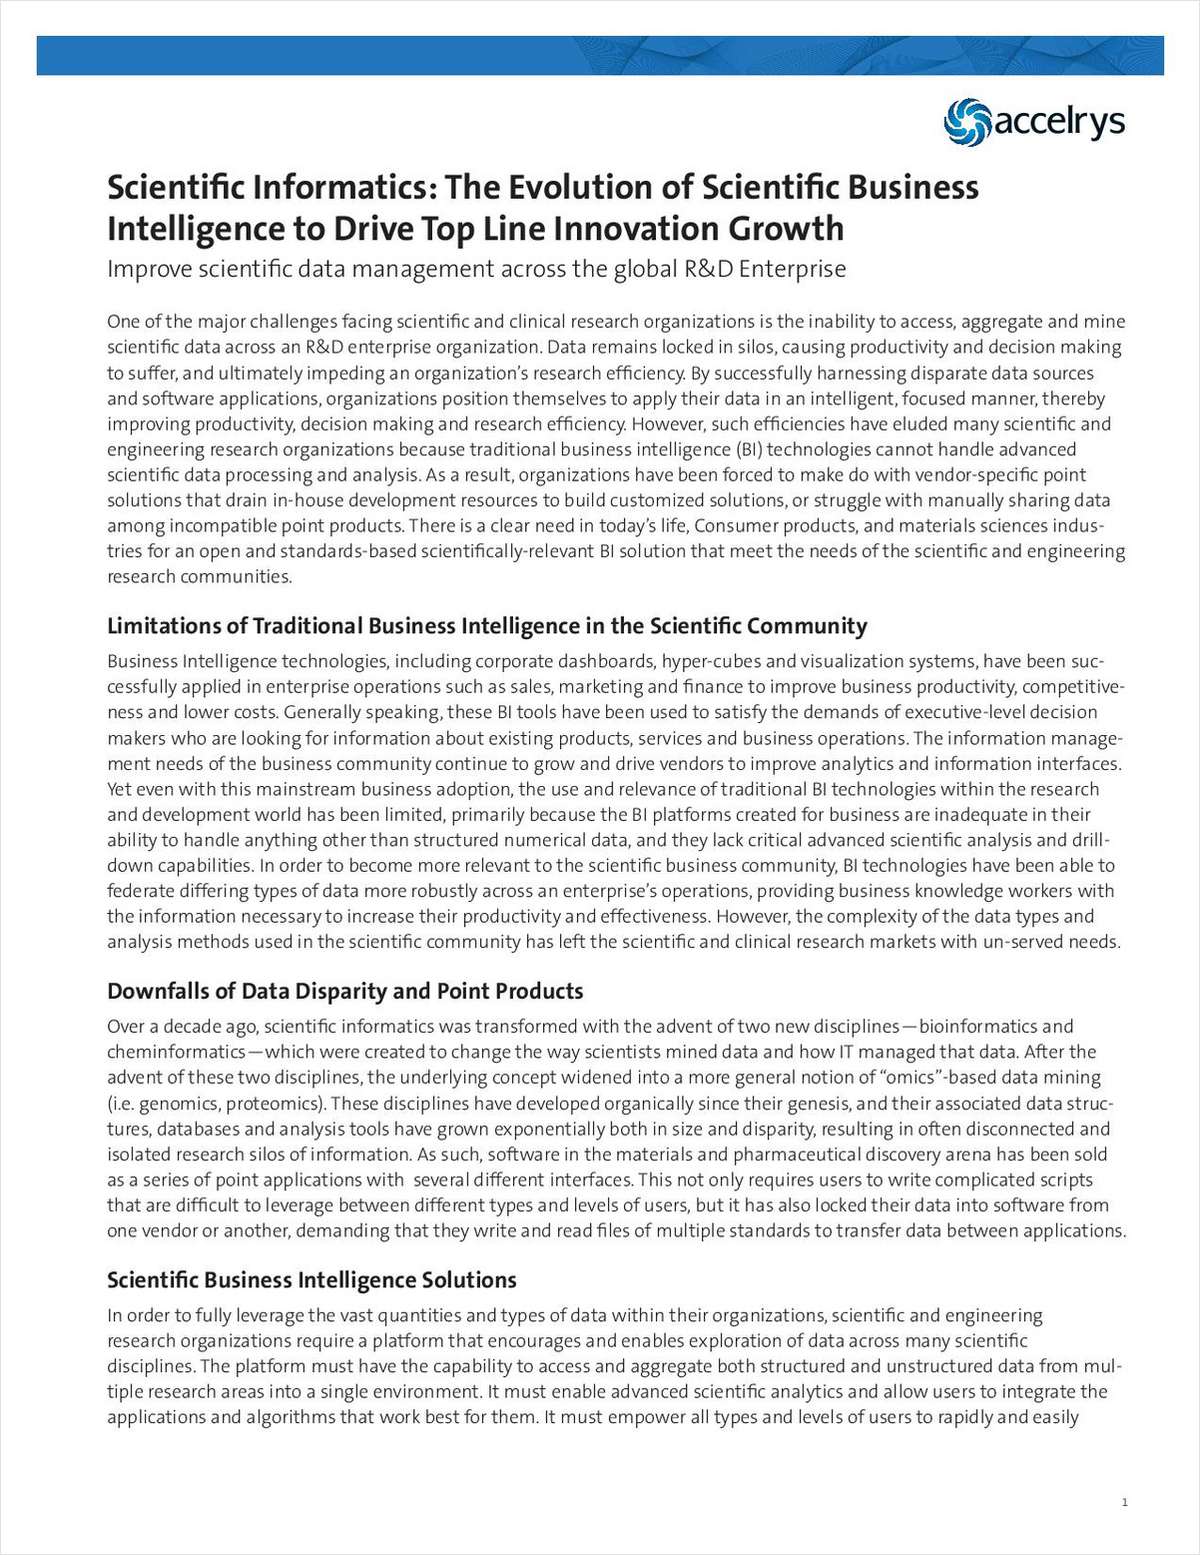 How Scientific Business Intelligence Can Drive Top Line Innovation Growth